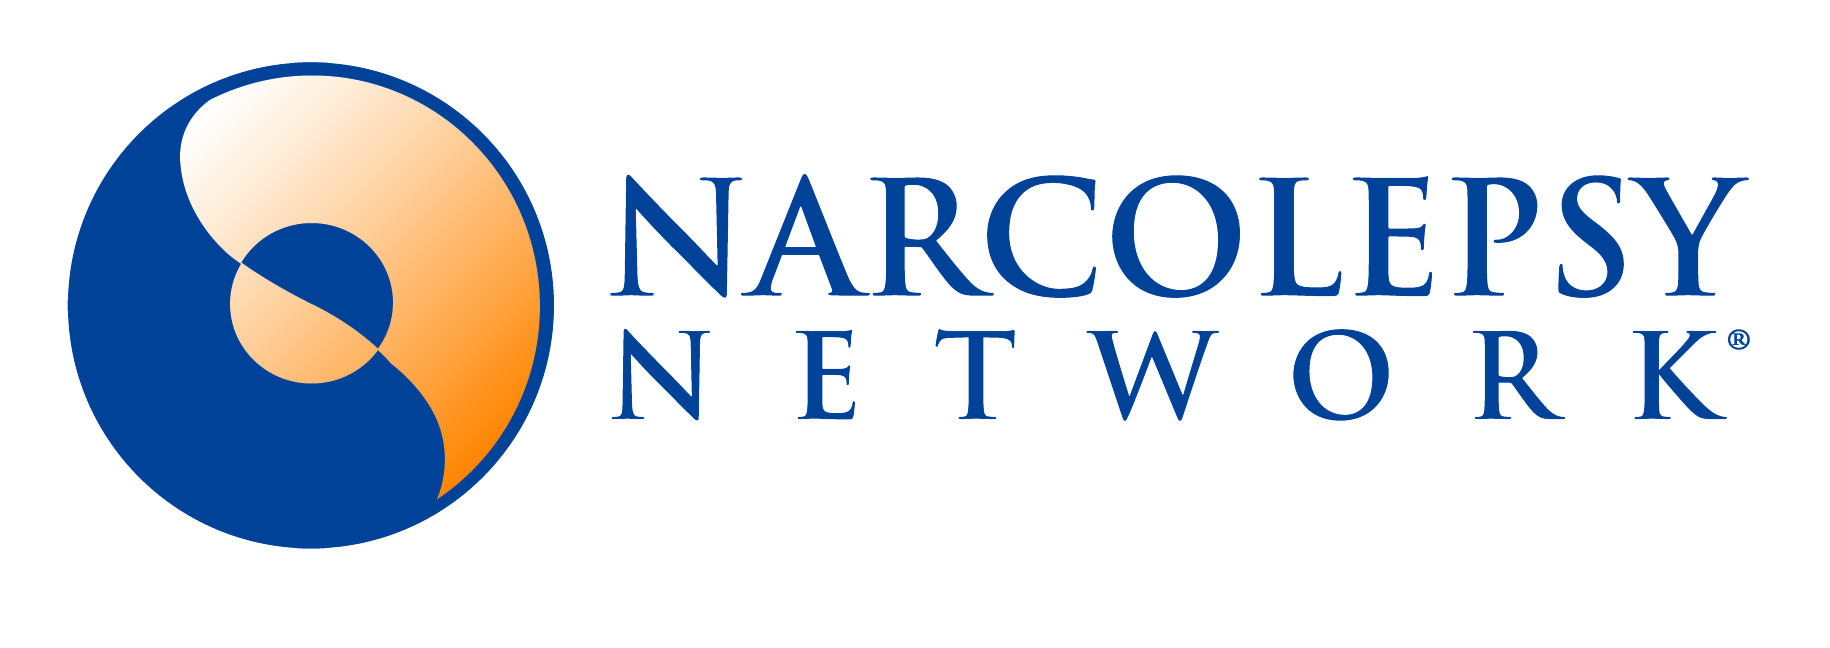 Narcolepsy Network has been supporting people with narcolepsy since 1986.